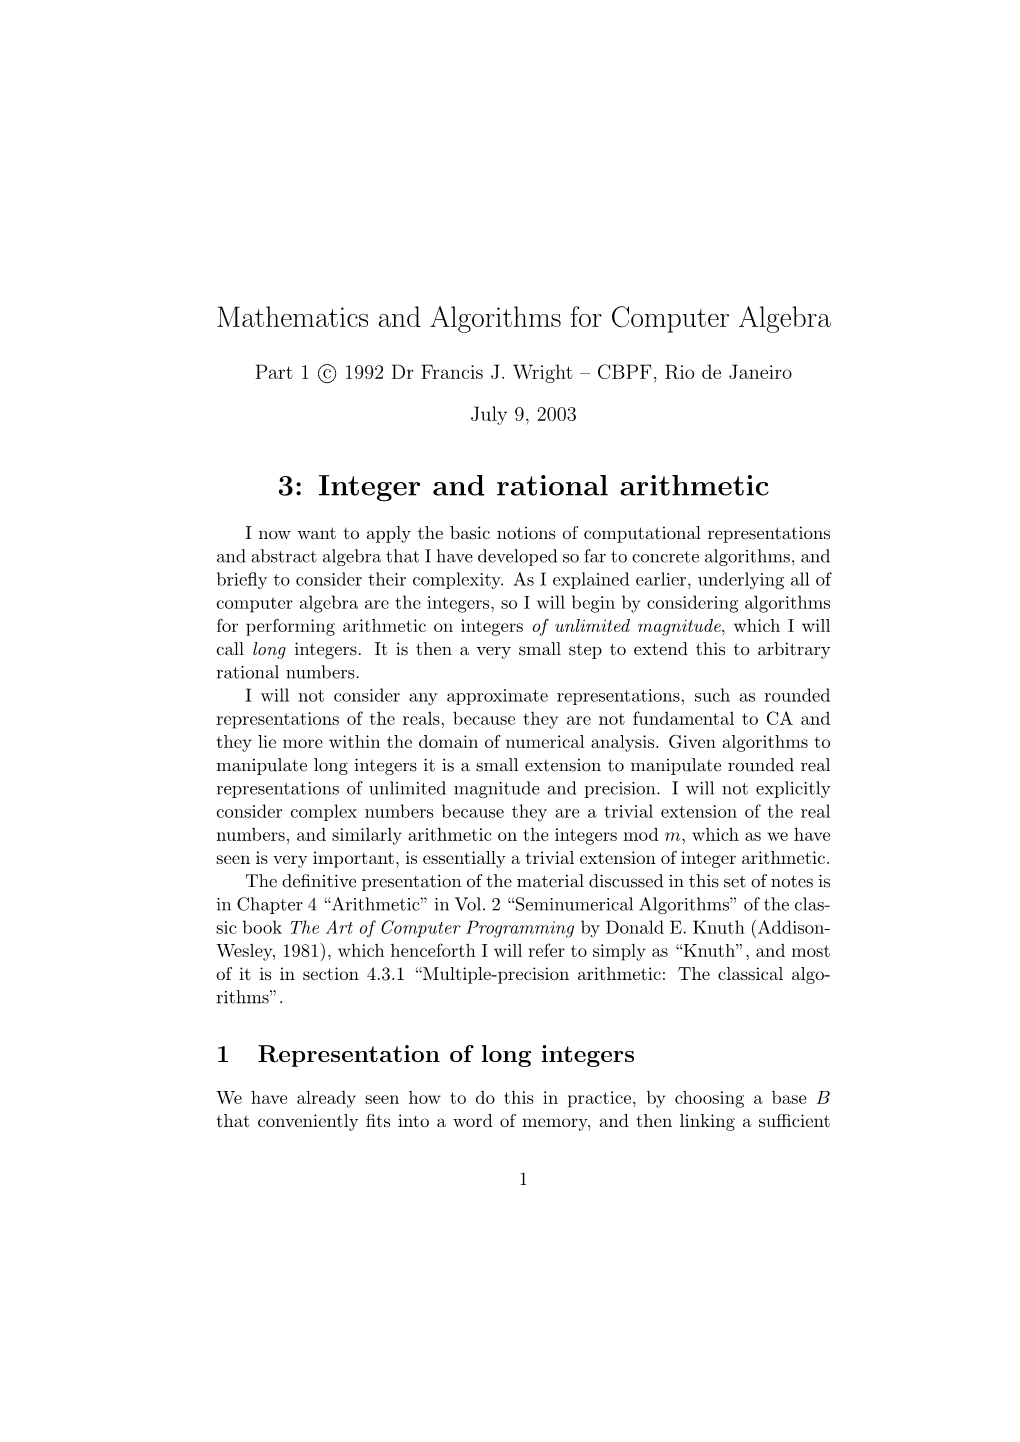 Integer and Rational Arithmetic